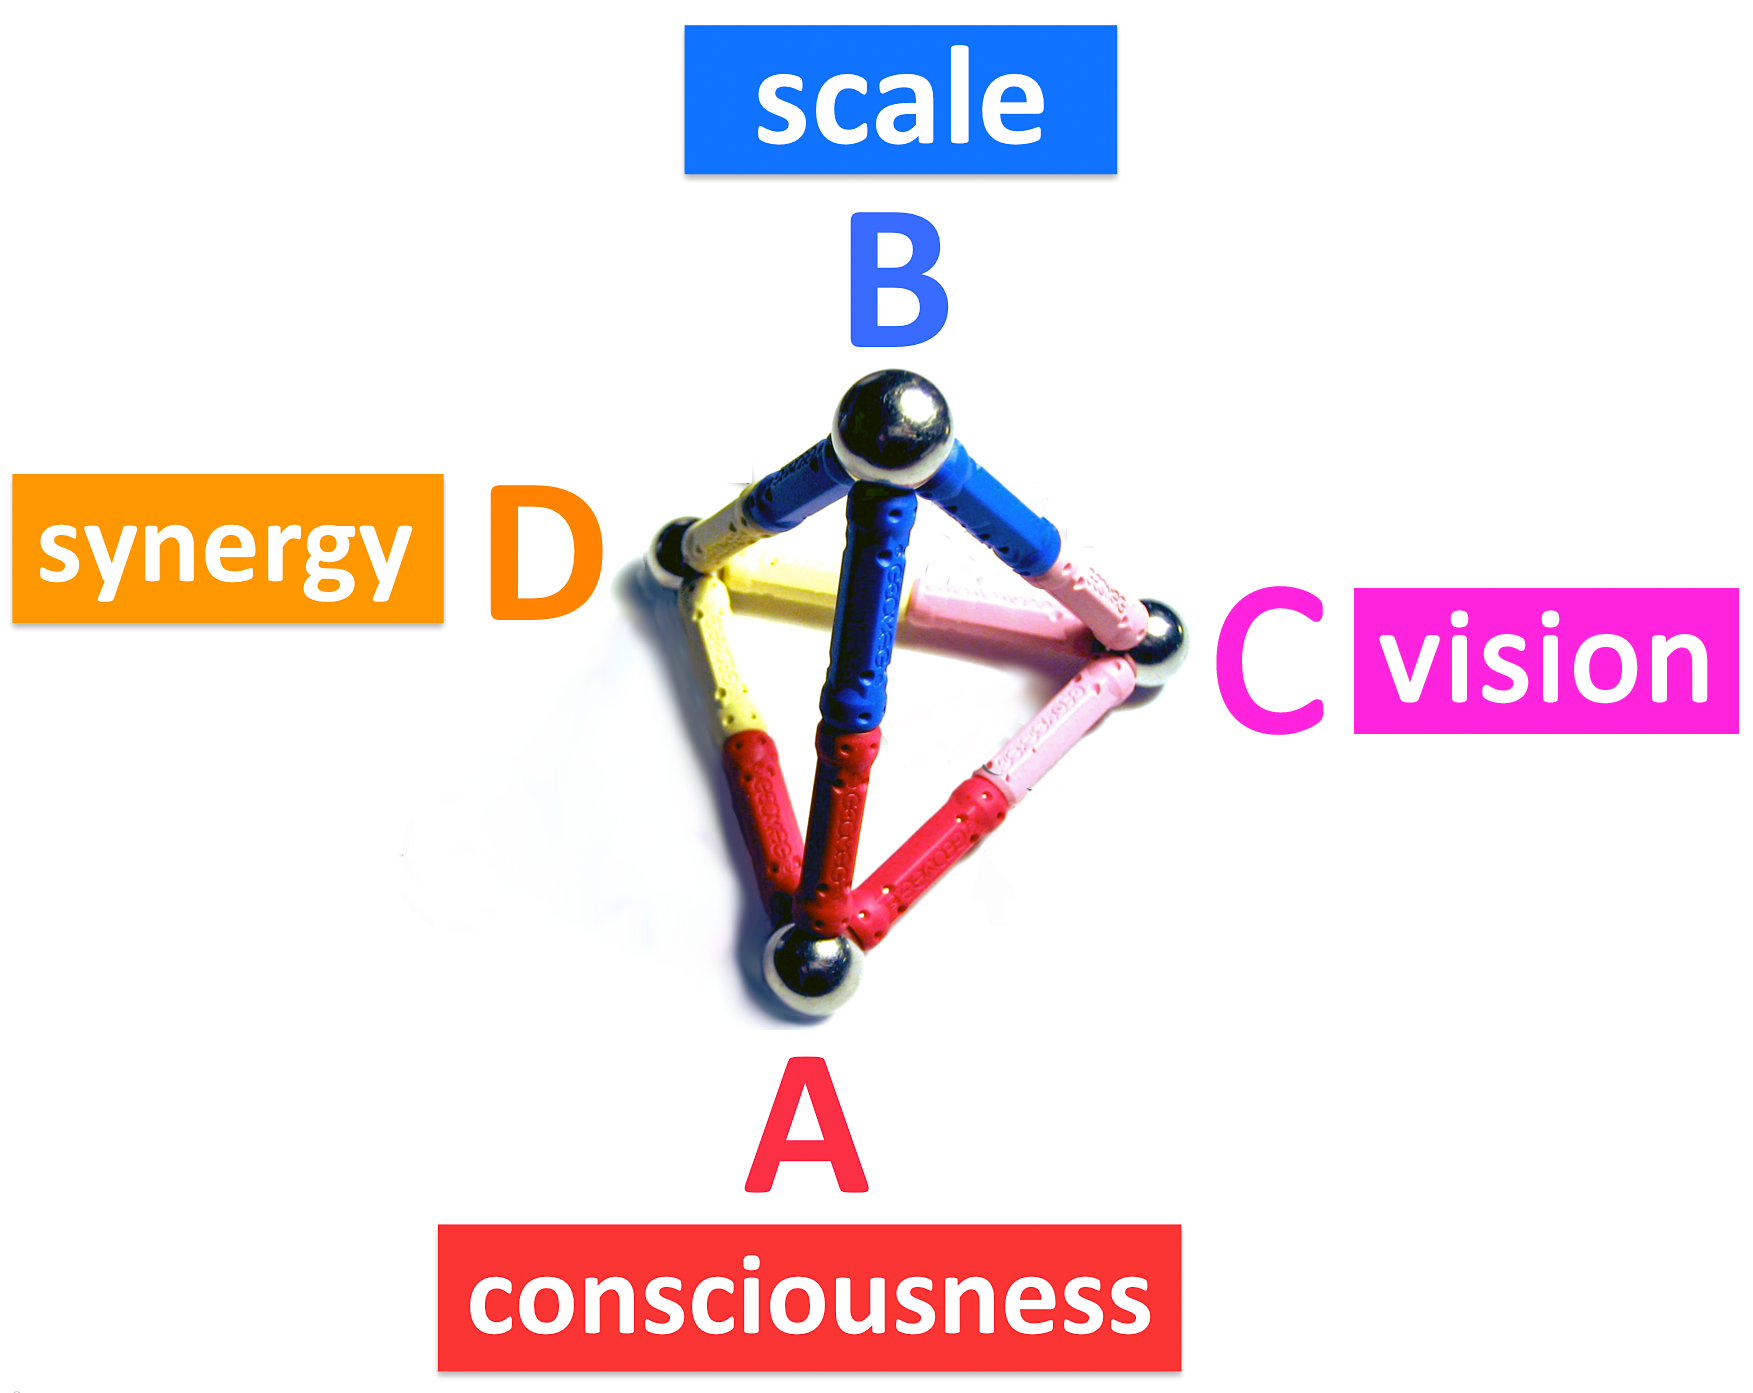 Scale Synergy Consciousness Vision New